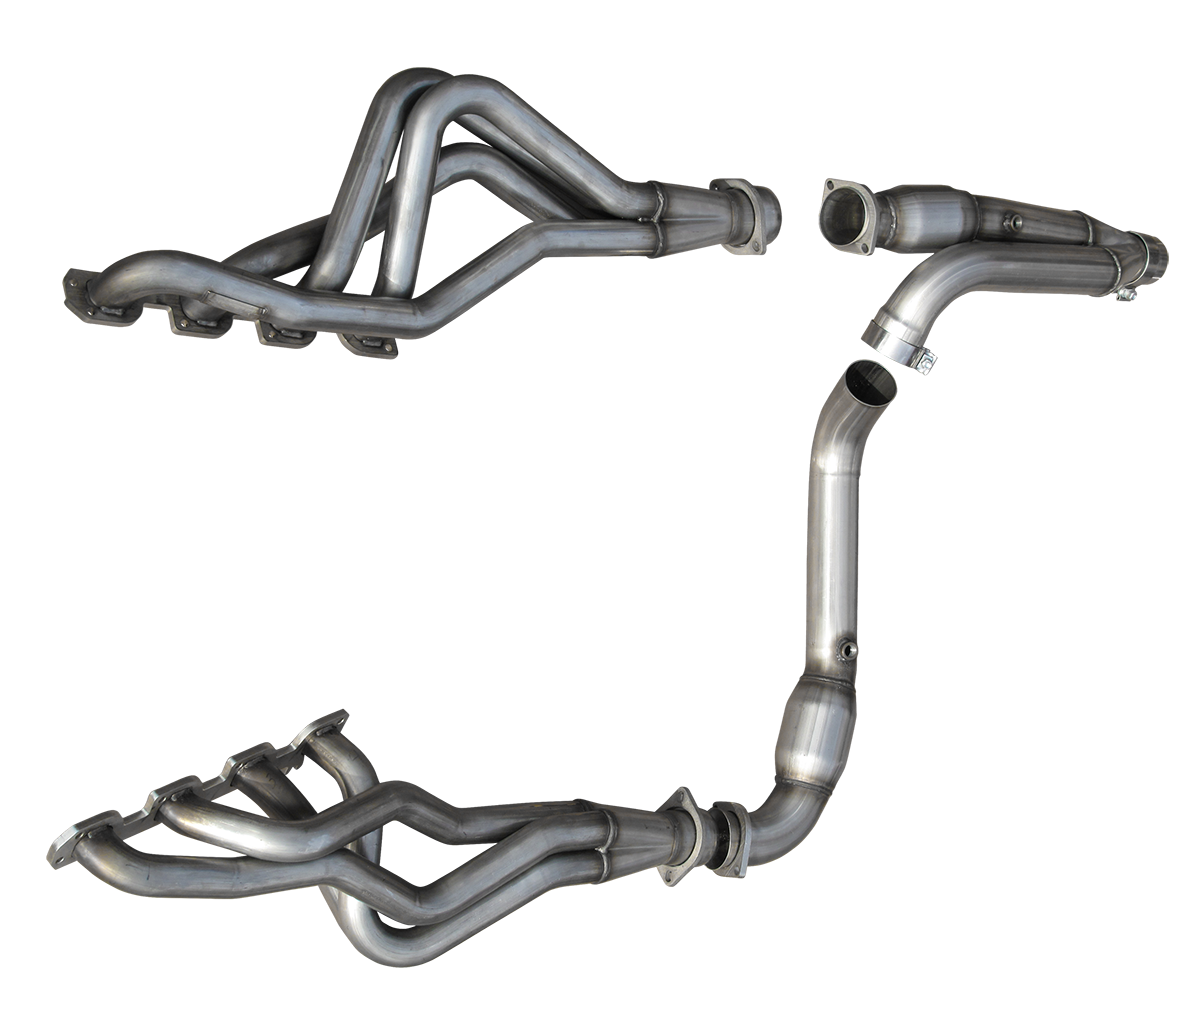 2009-2013 Dodge Ram 1500 American Racing Headers 1 7/8" x 3" Long Tube Headers w/3" Ypipe, Cats & Pure Thunder Exhaust System